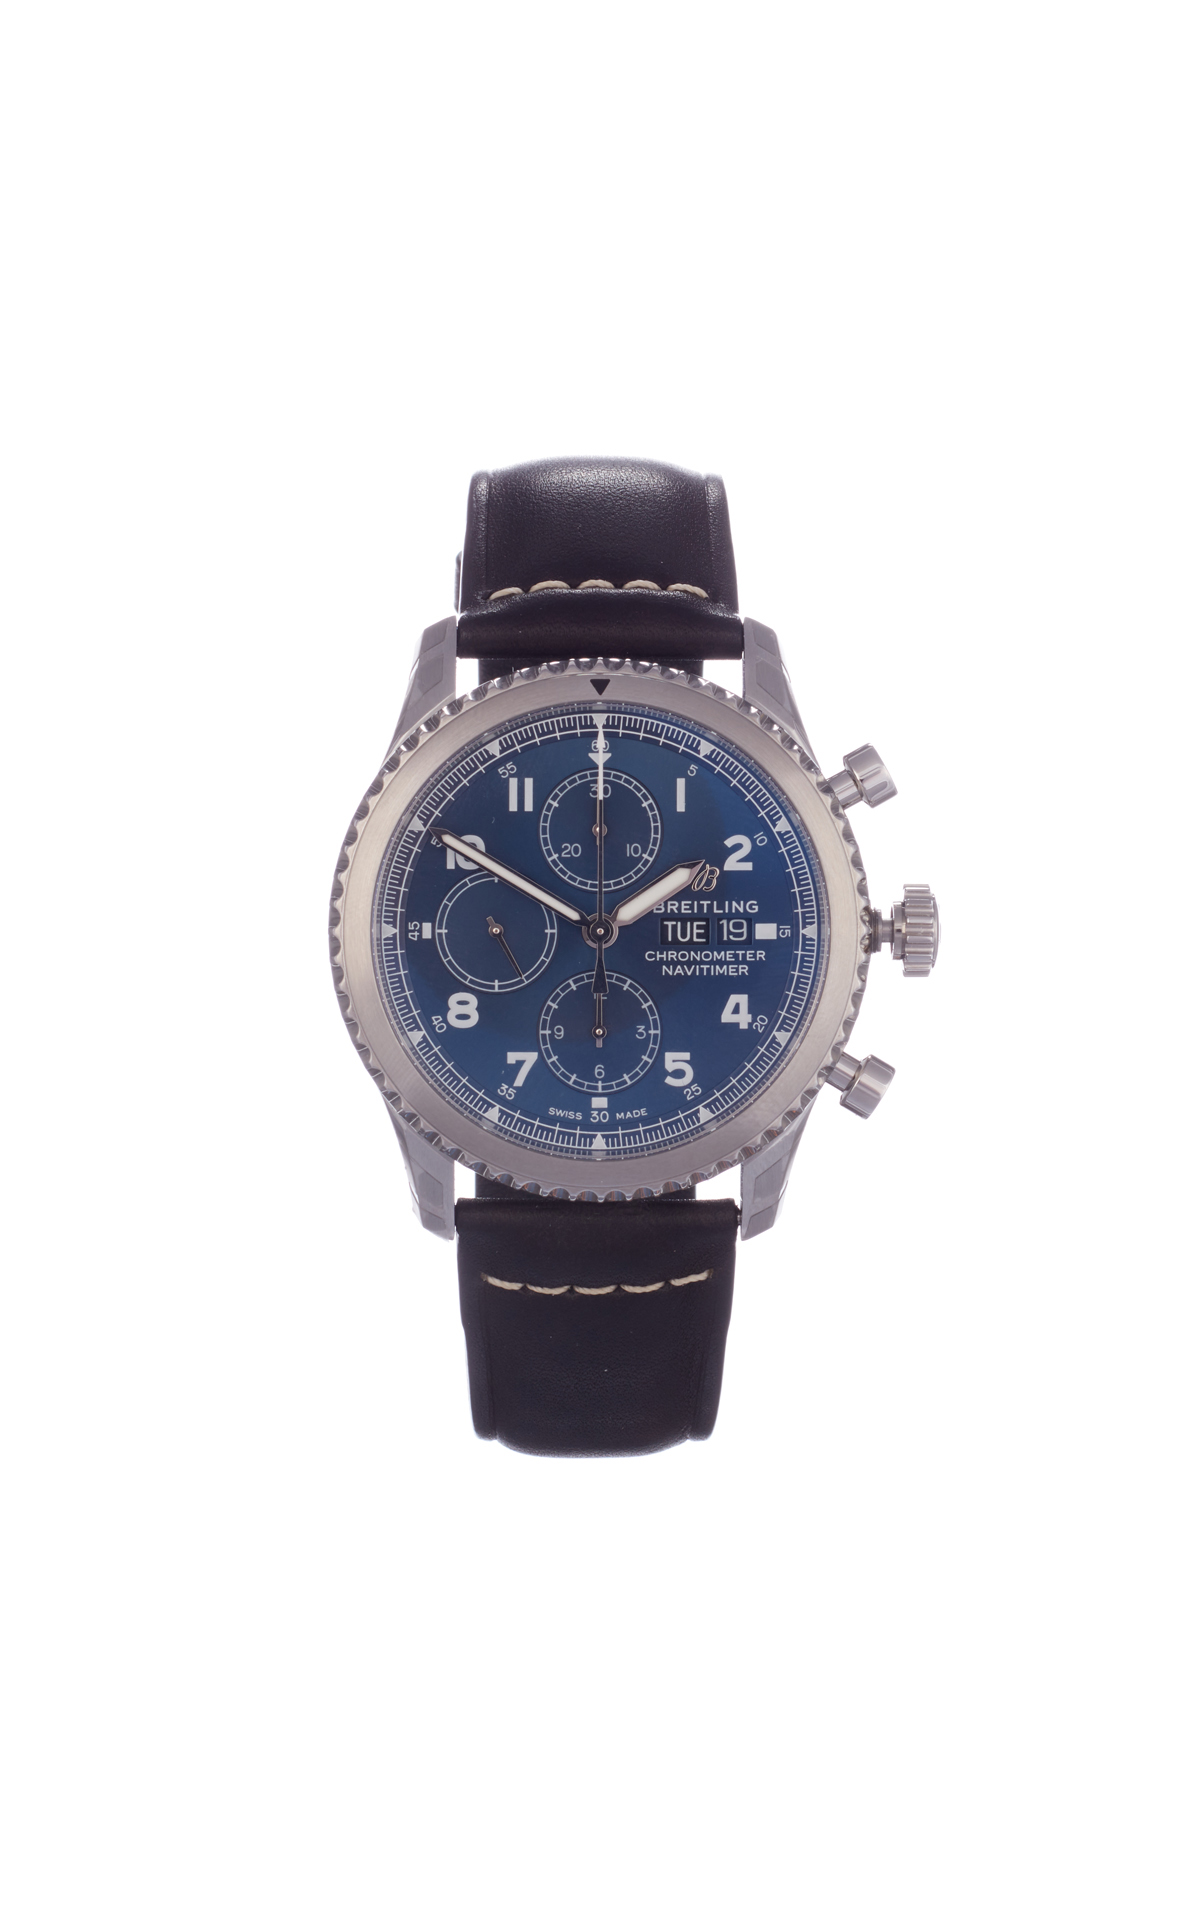 Breitling Chronograph navitimer watch from Bicester Village